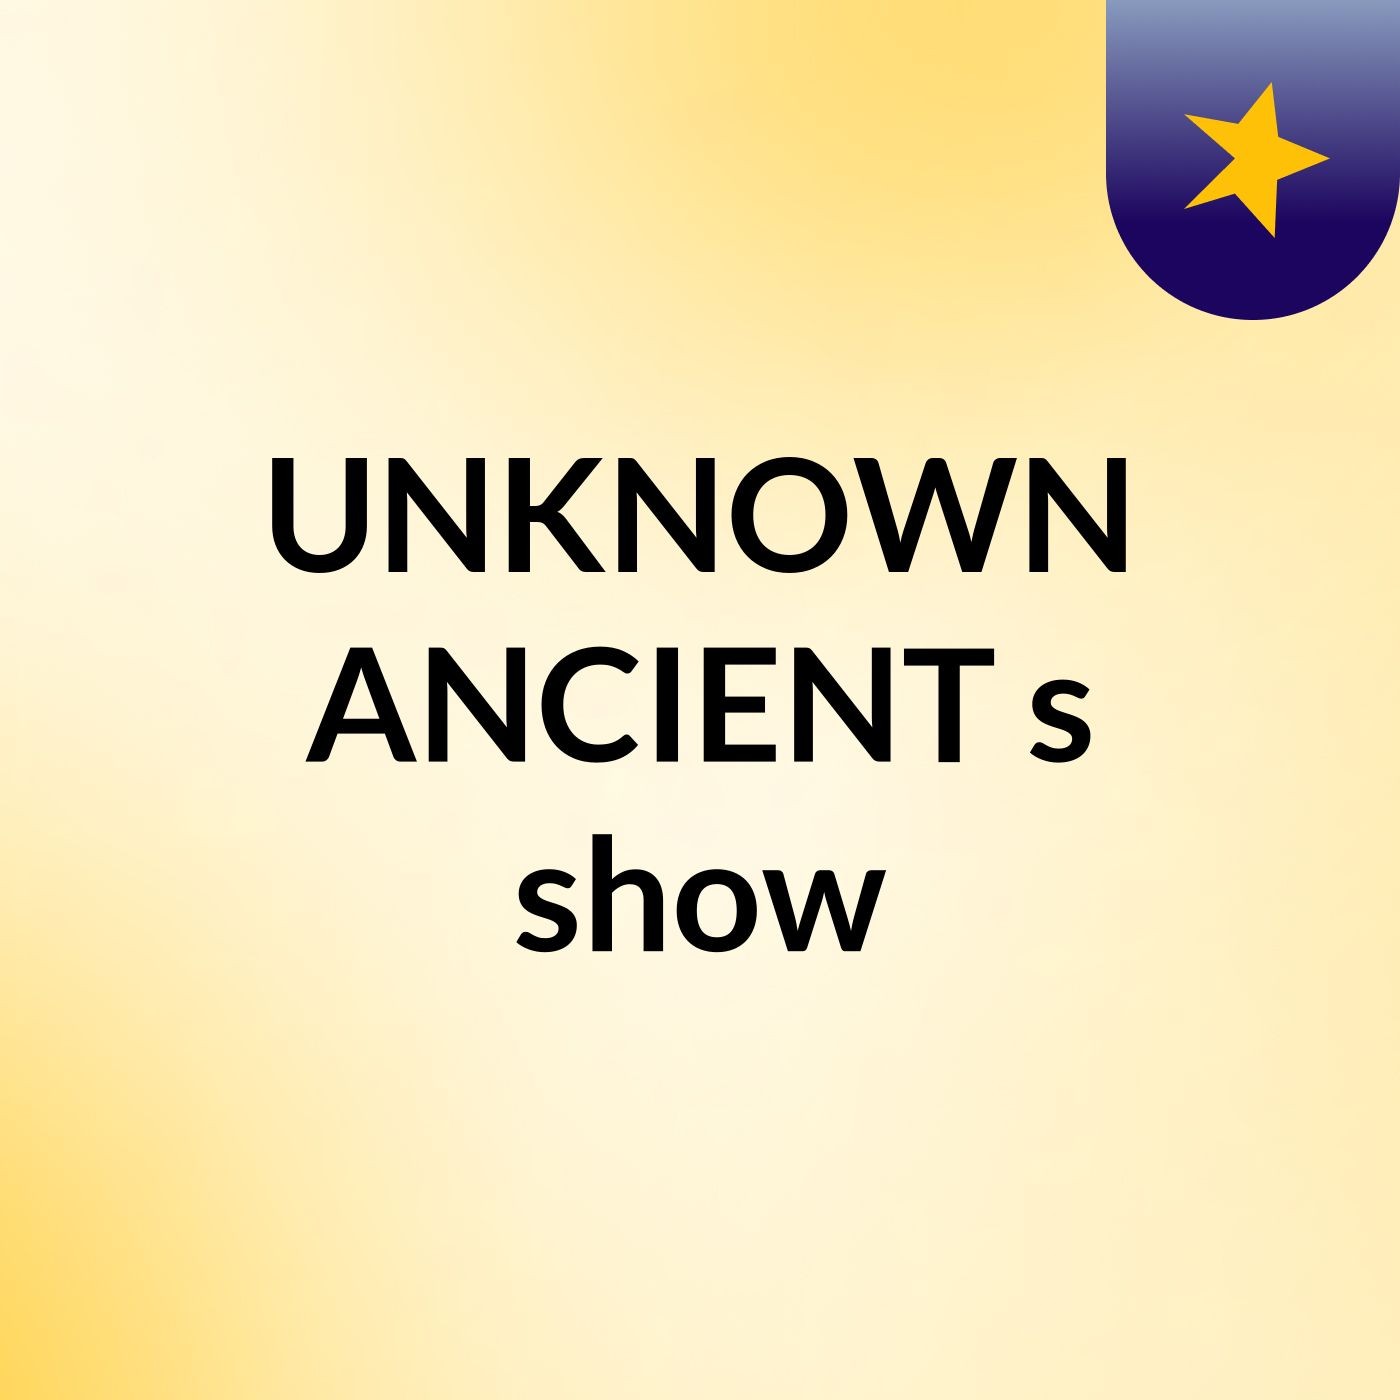 UNKNOWN ANCIENT's show